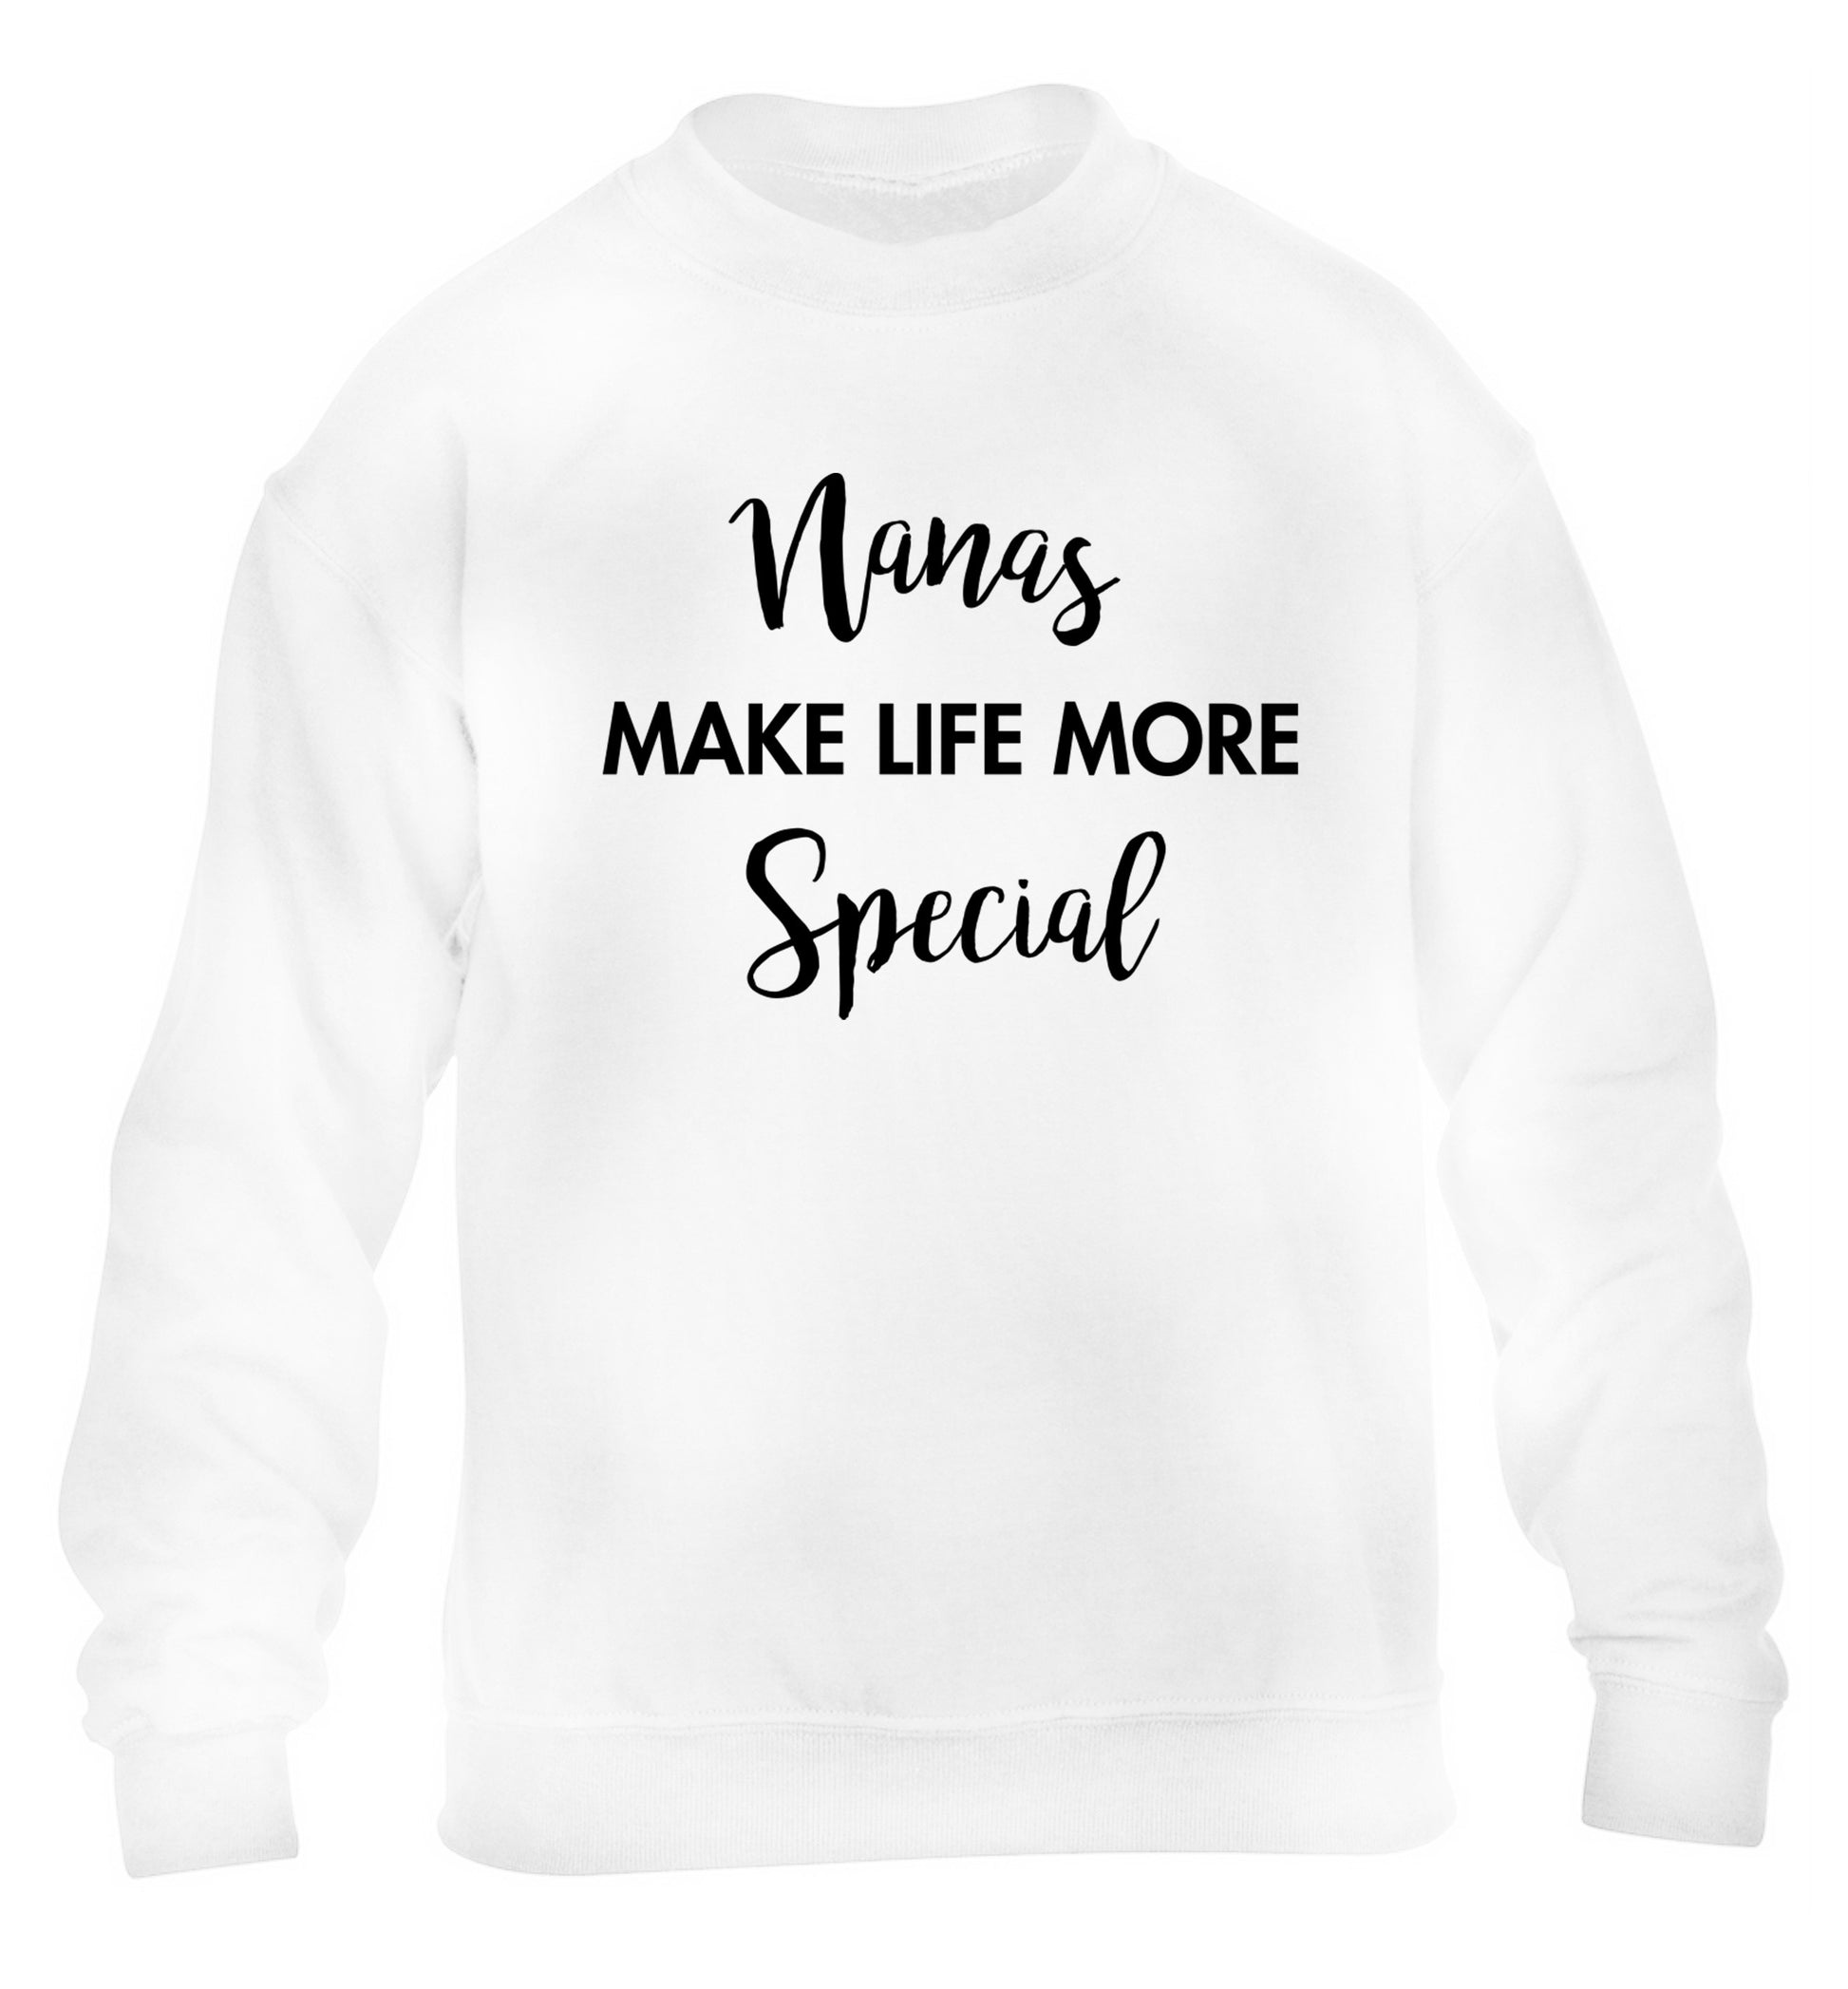 Nanas make life more special children's white sweater 12-14 Years